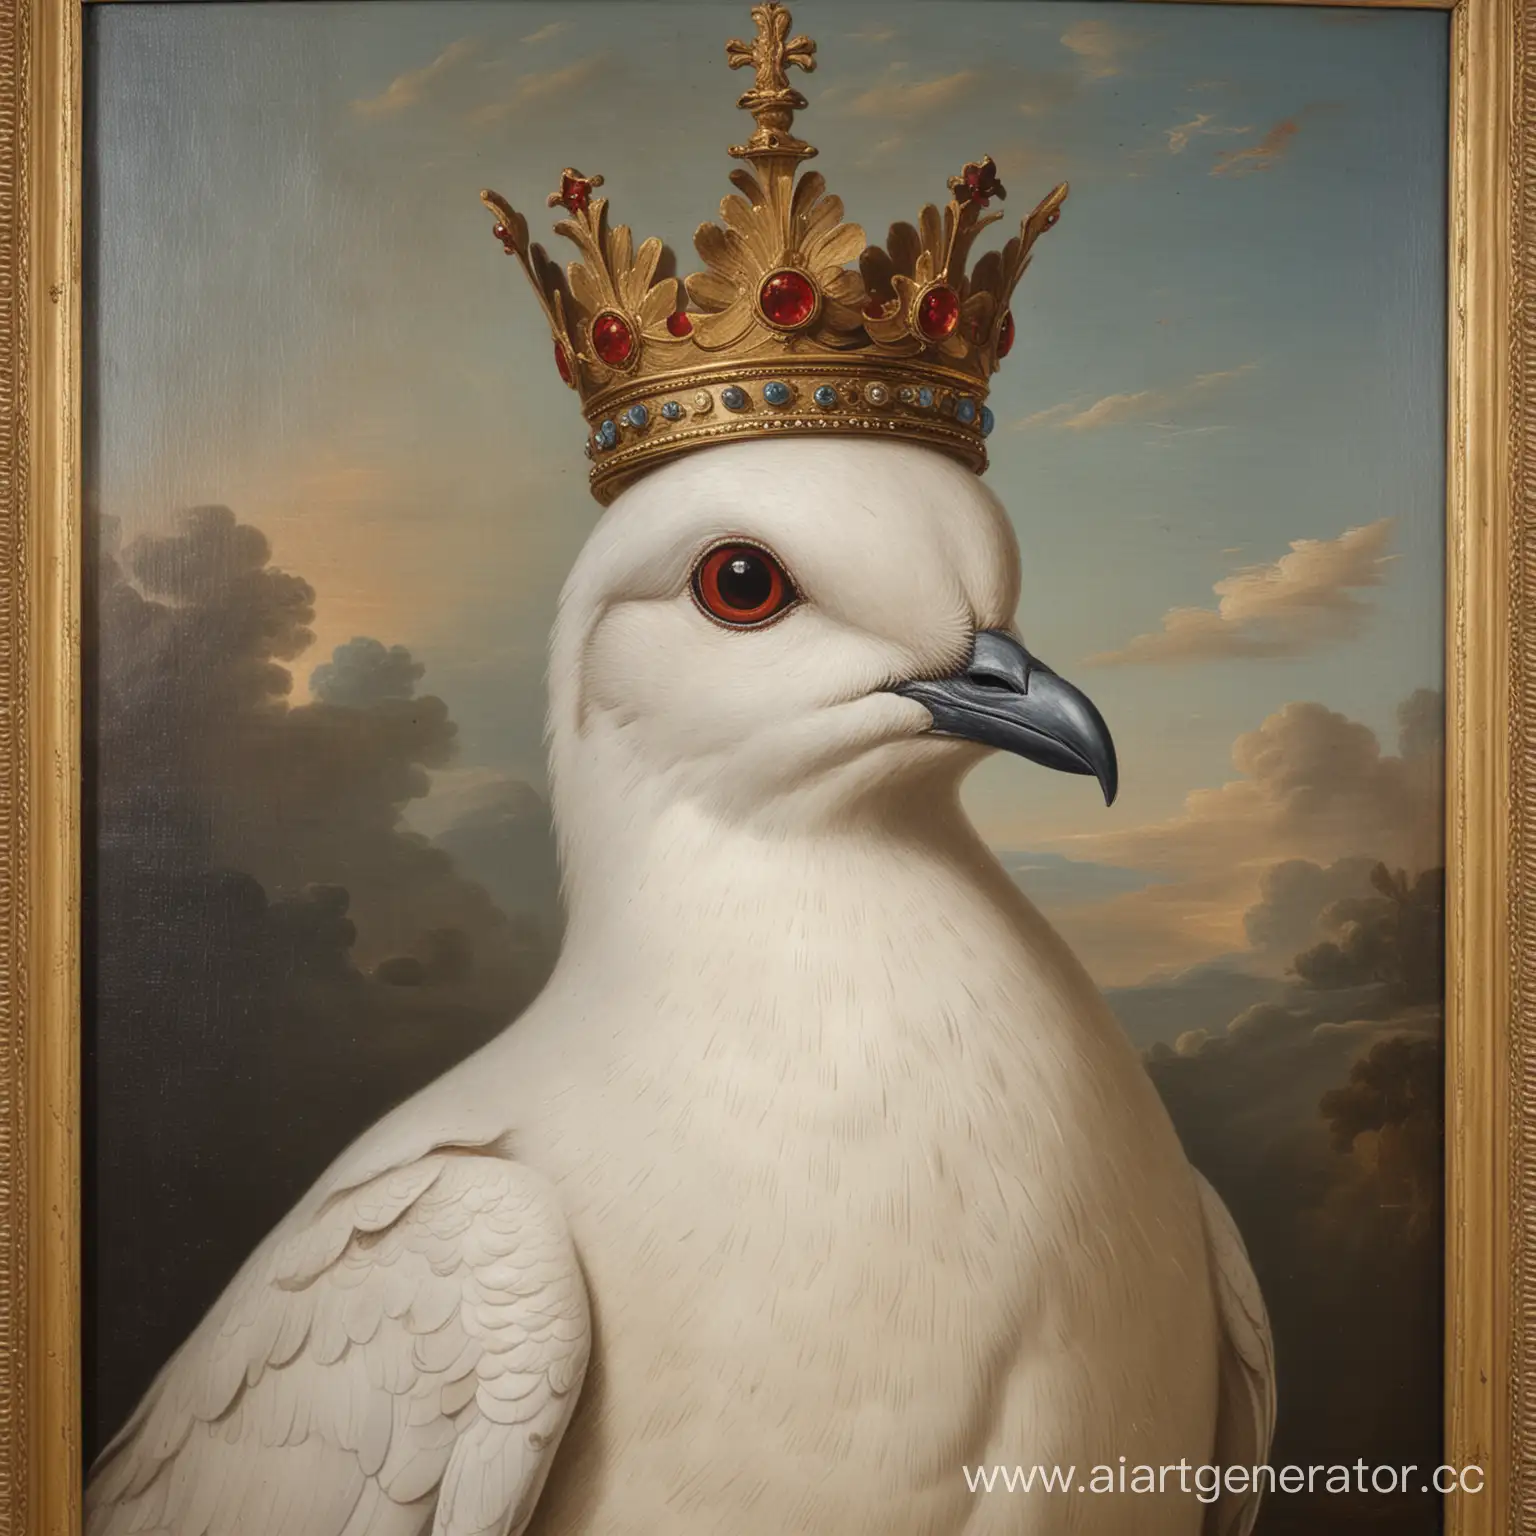 18th-Century-Oil-Painting-of-a-Majestic-Dove-with-Crown-and-Glaring-Red-Eyes